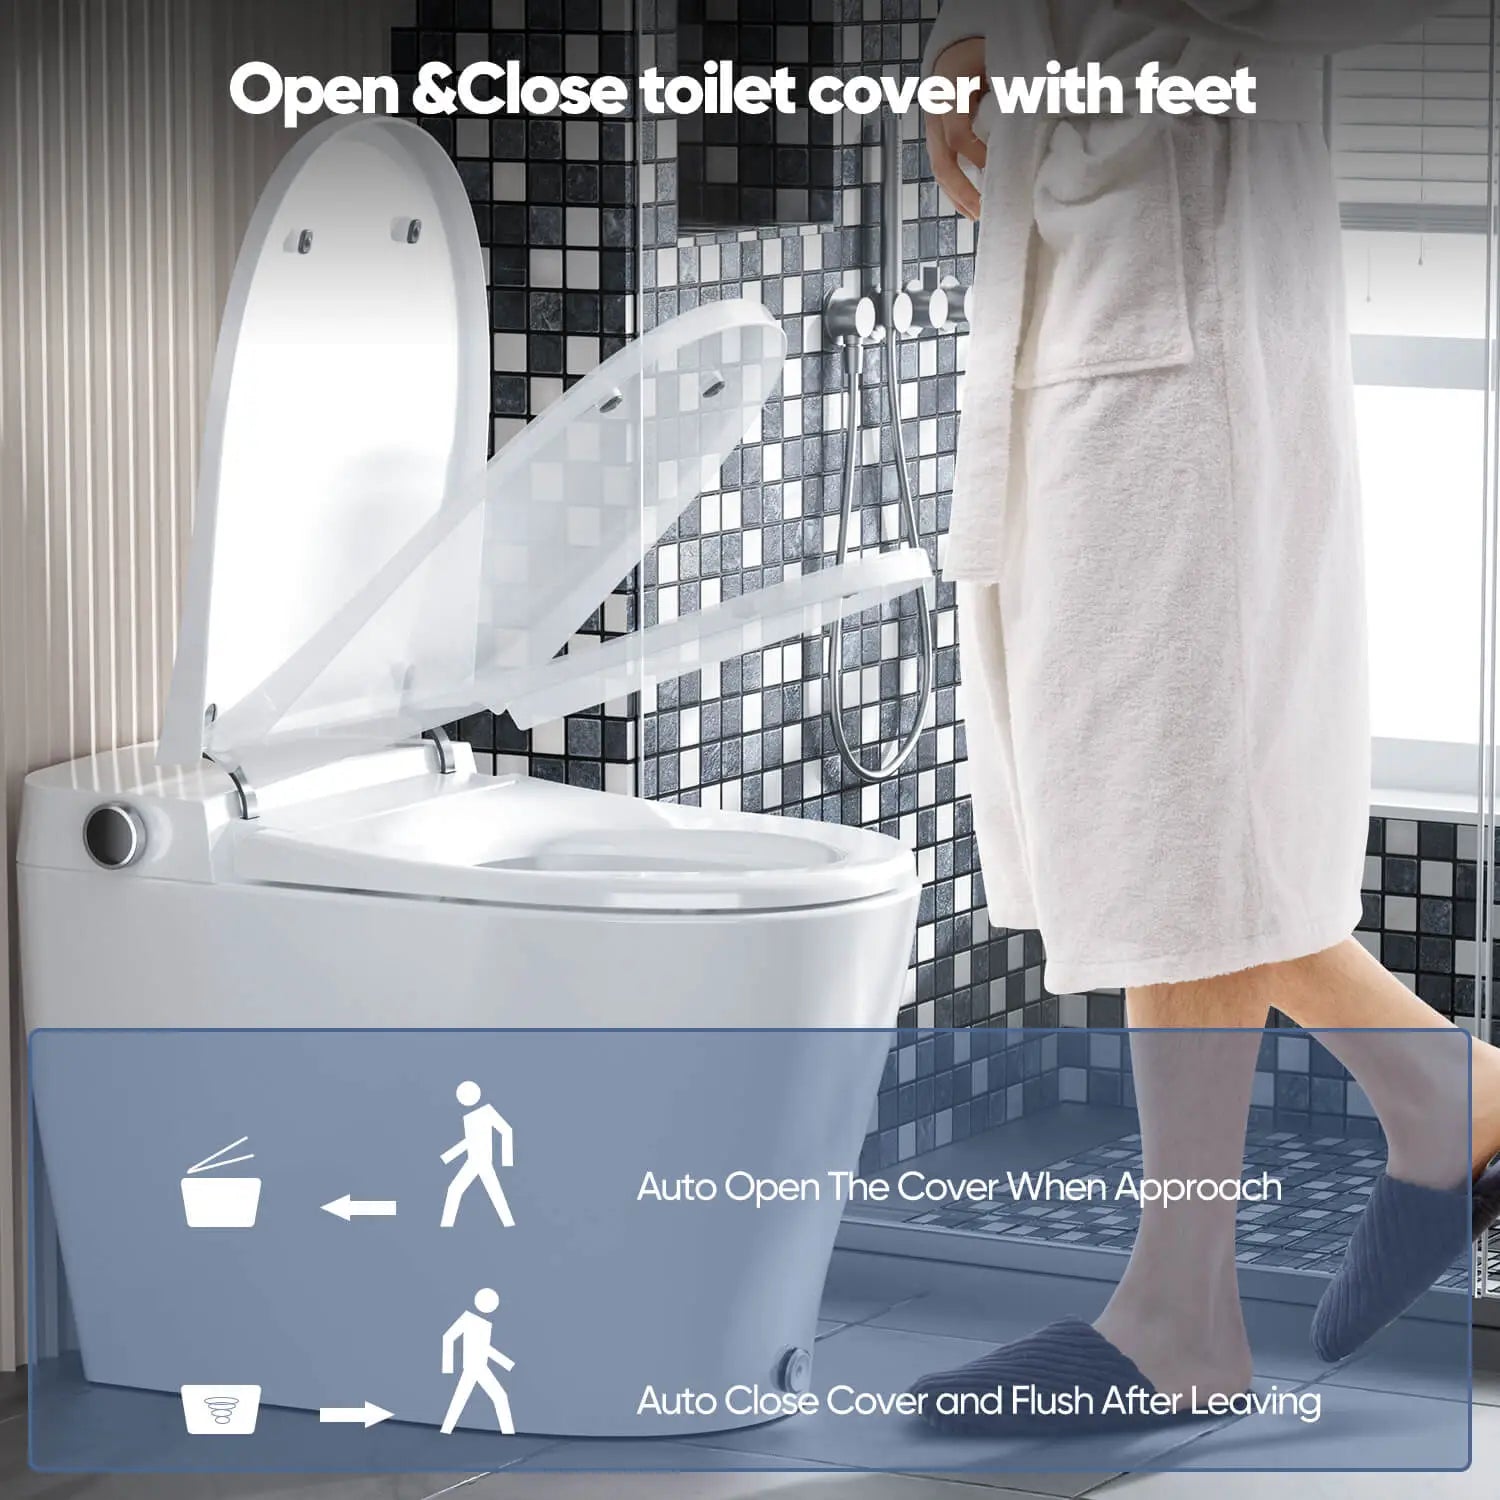 Key Features of HOROW T05 Smart Toilets